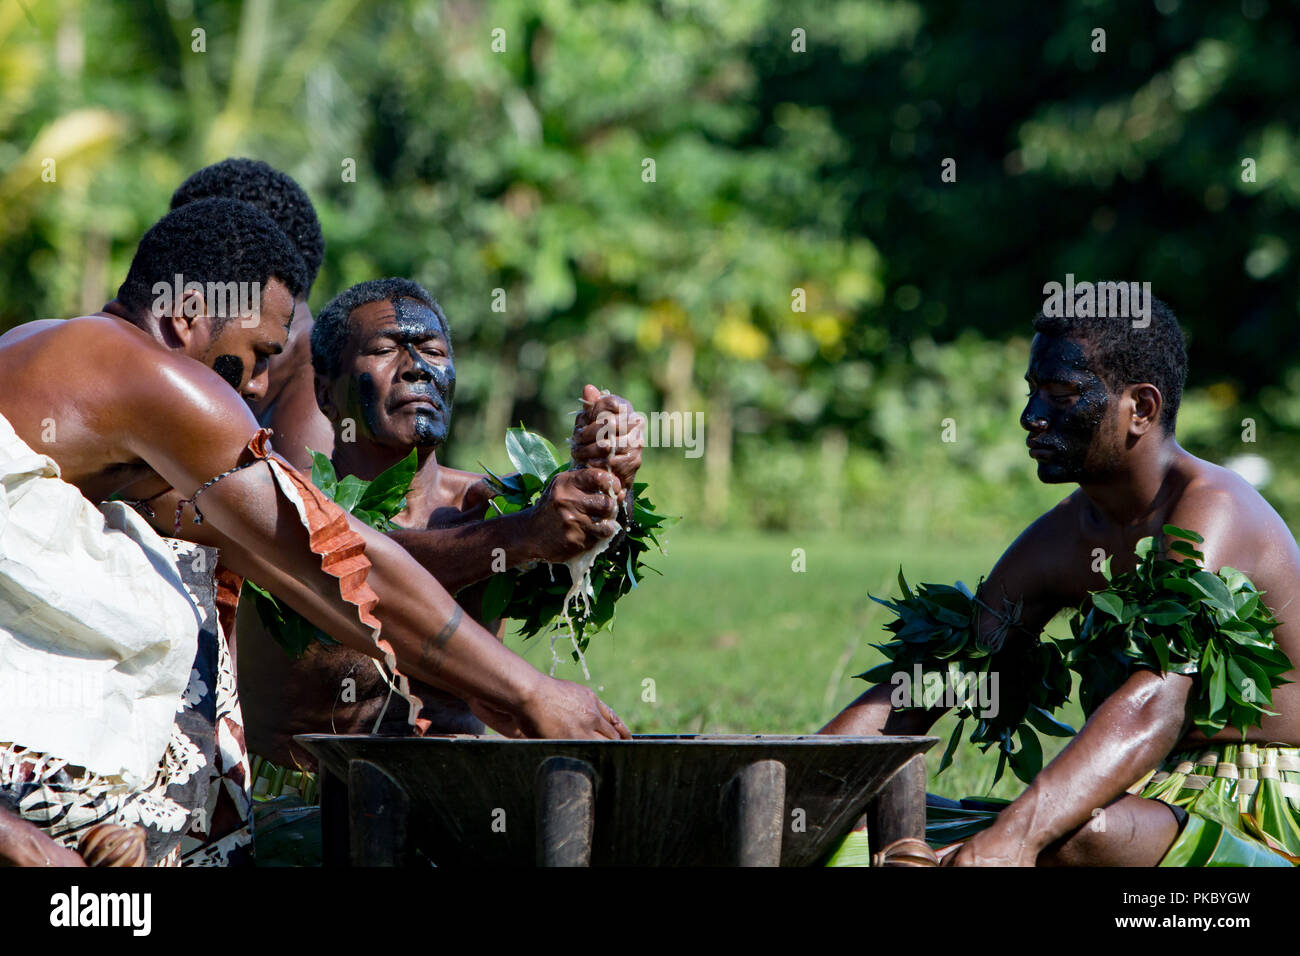 The villagers of Waitabu village in Taveuni island, Fiji put on a traditonal kava ceremony for a group of cultural tourists. Stock Photo